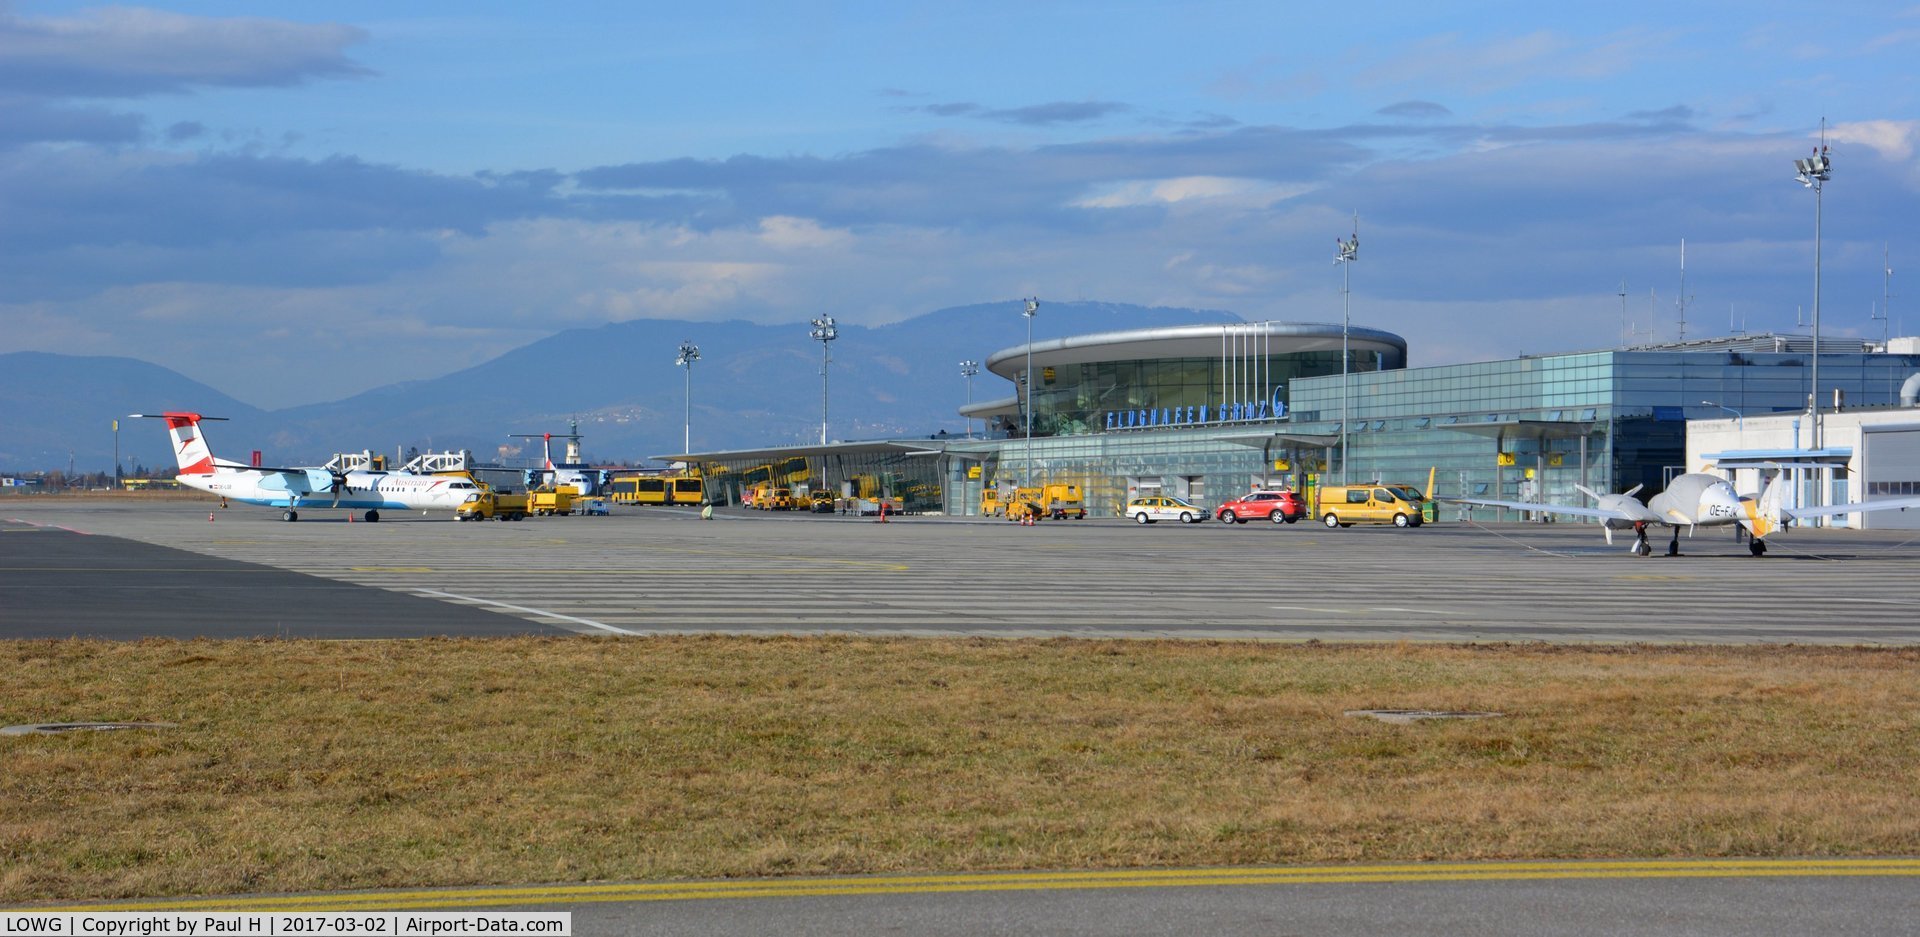 Graz Airport, Graz Austria (LOWG) - View from general aviation section at Graz airport, LOWG